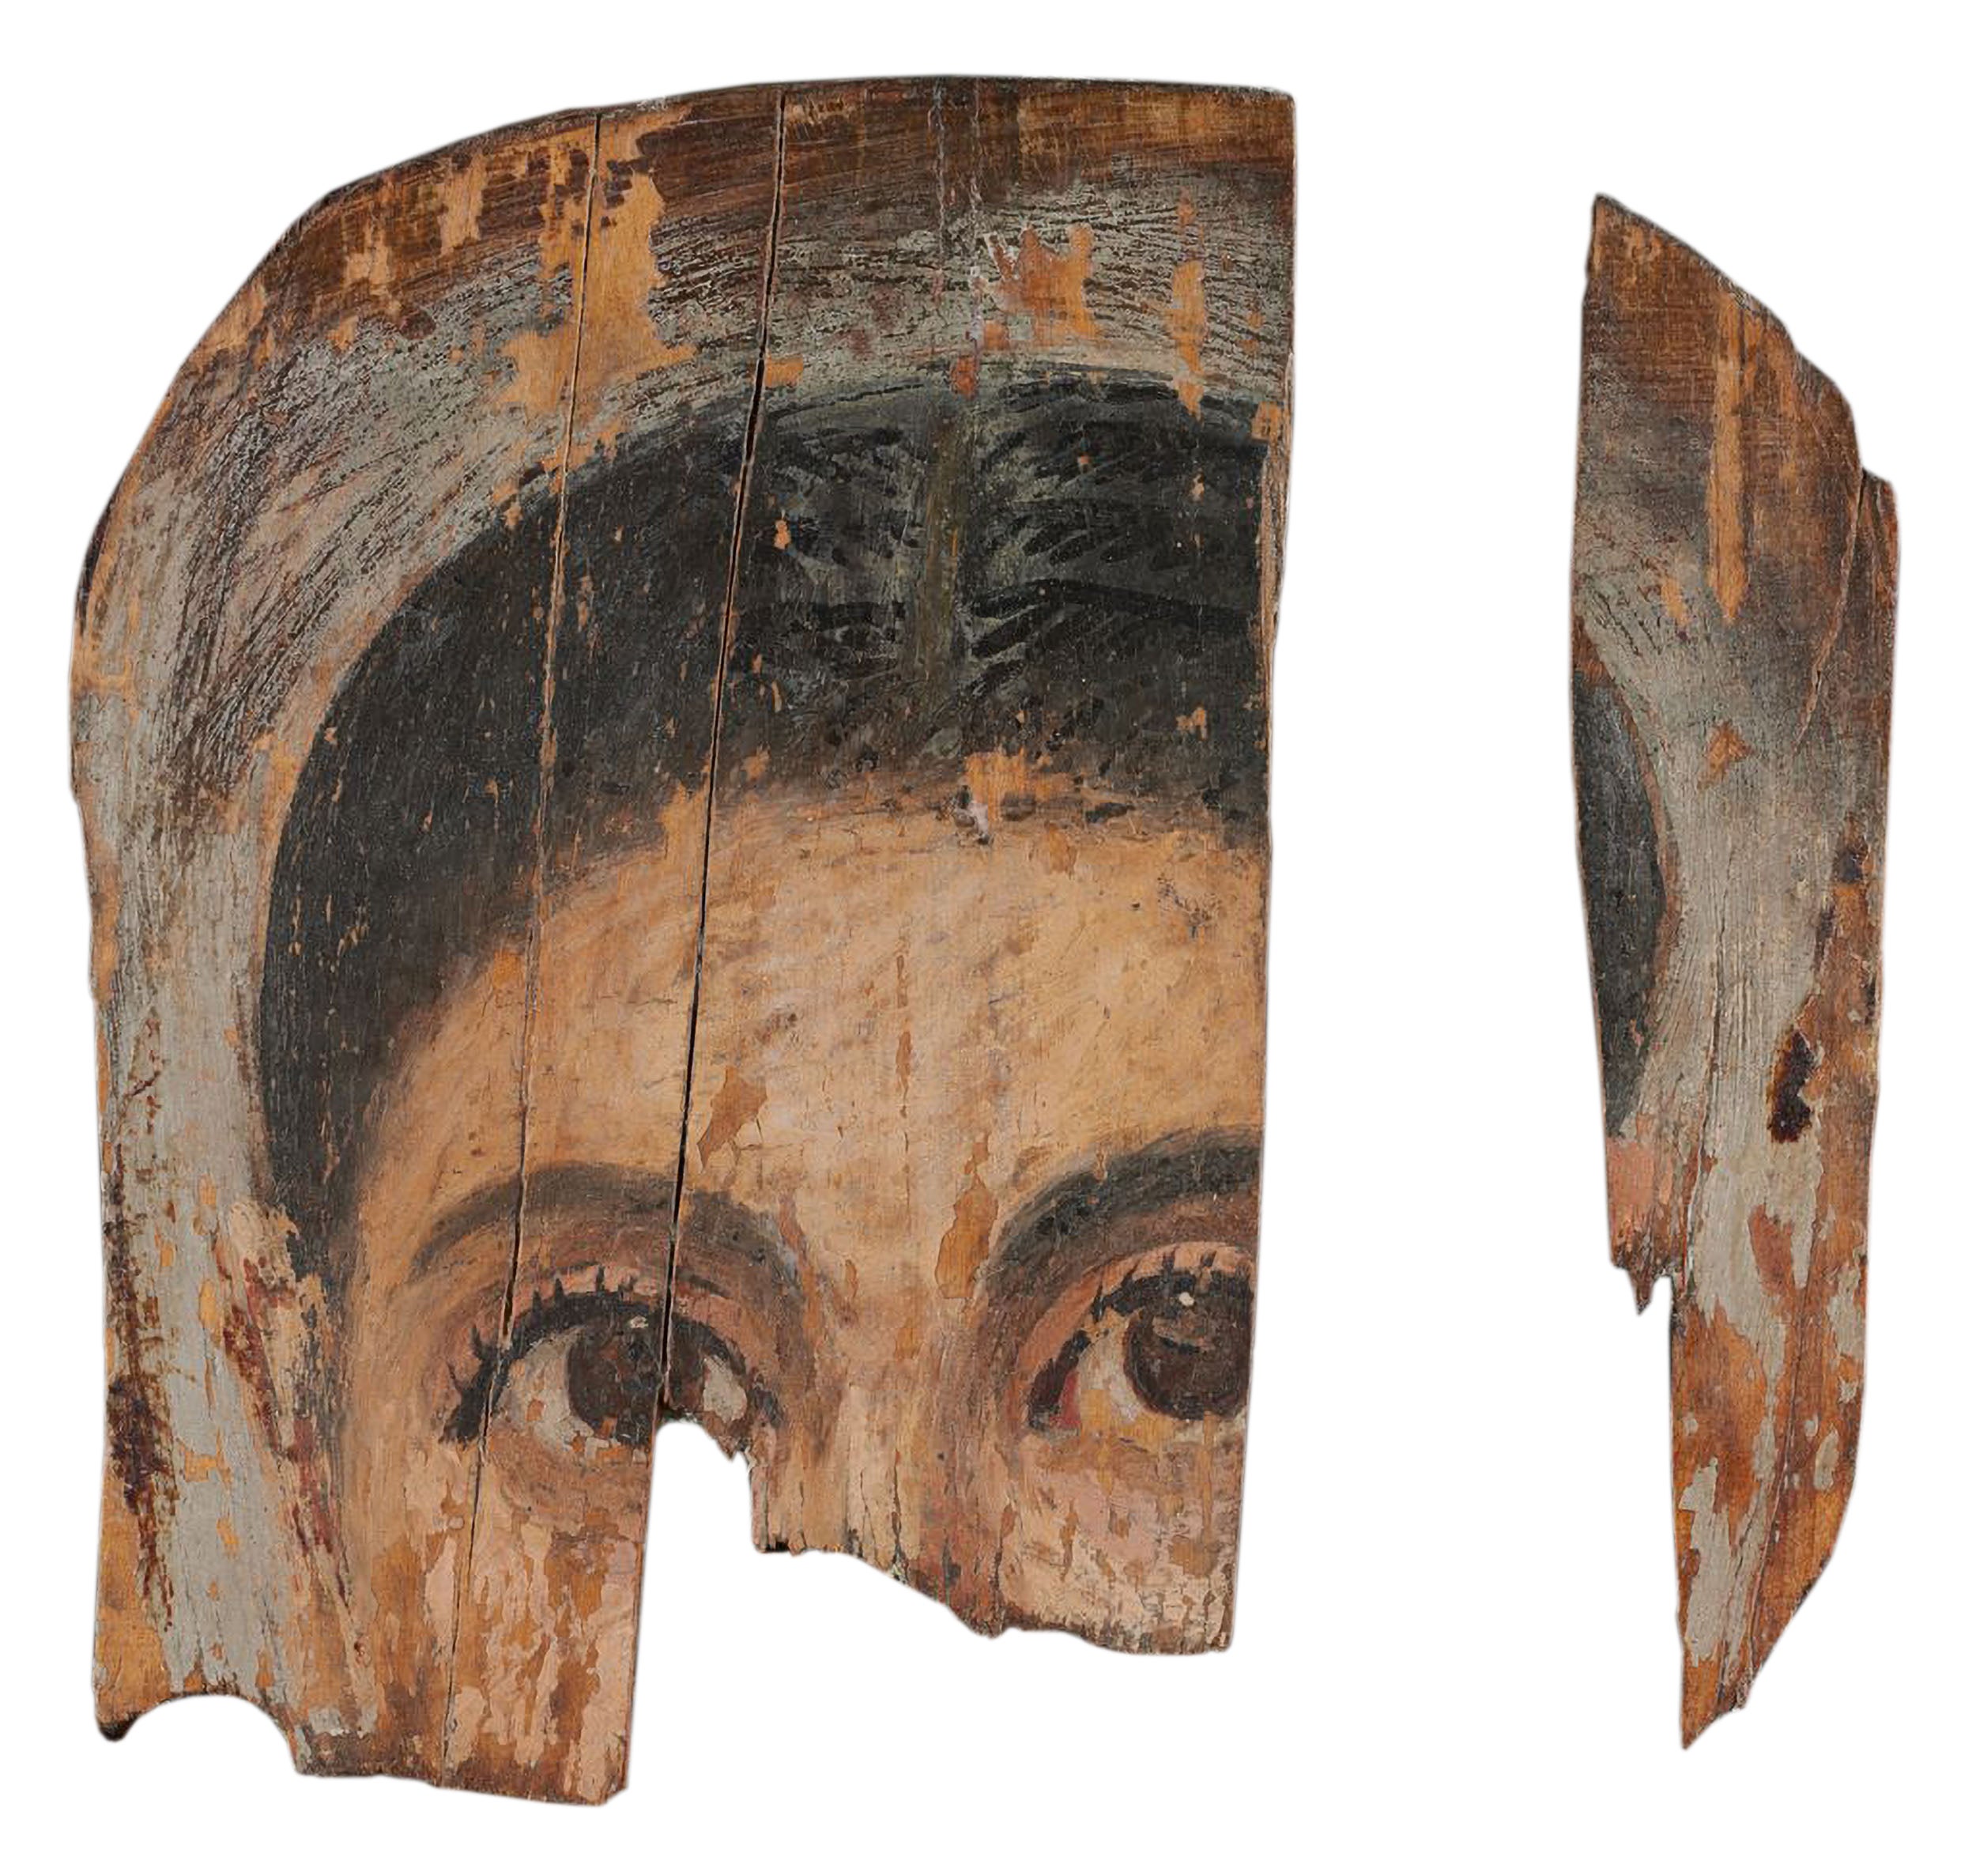 Fragmentary portrait of a woman from Roman Egypt with lower half of face and much of right side of face missing. with large brown eyes that are delicately rimmed with thick lashes. The figure's black-brown hair is parted in the center and pulled back from her face with visible rows of herring-bone pattern painted in thick, dark pigment to suggest plaited rows.